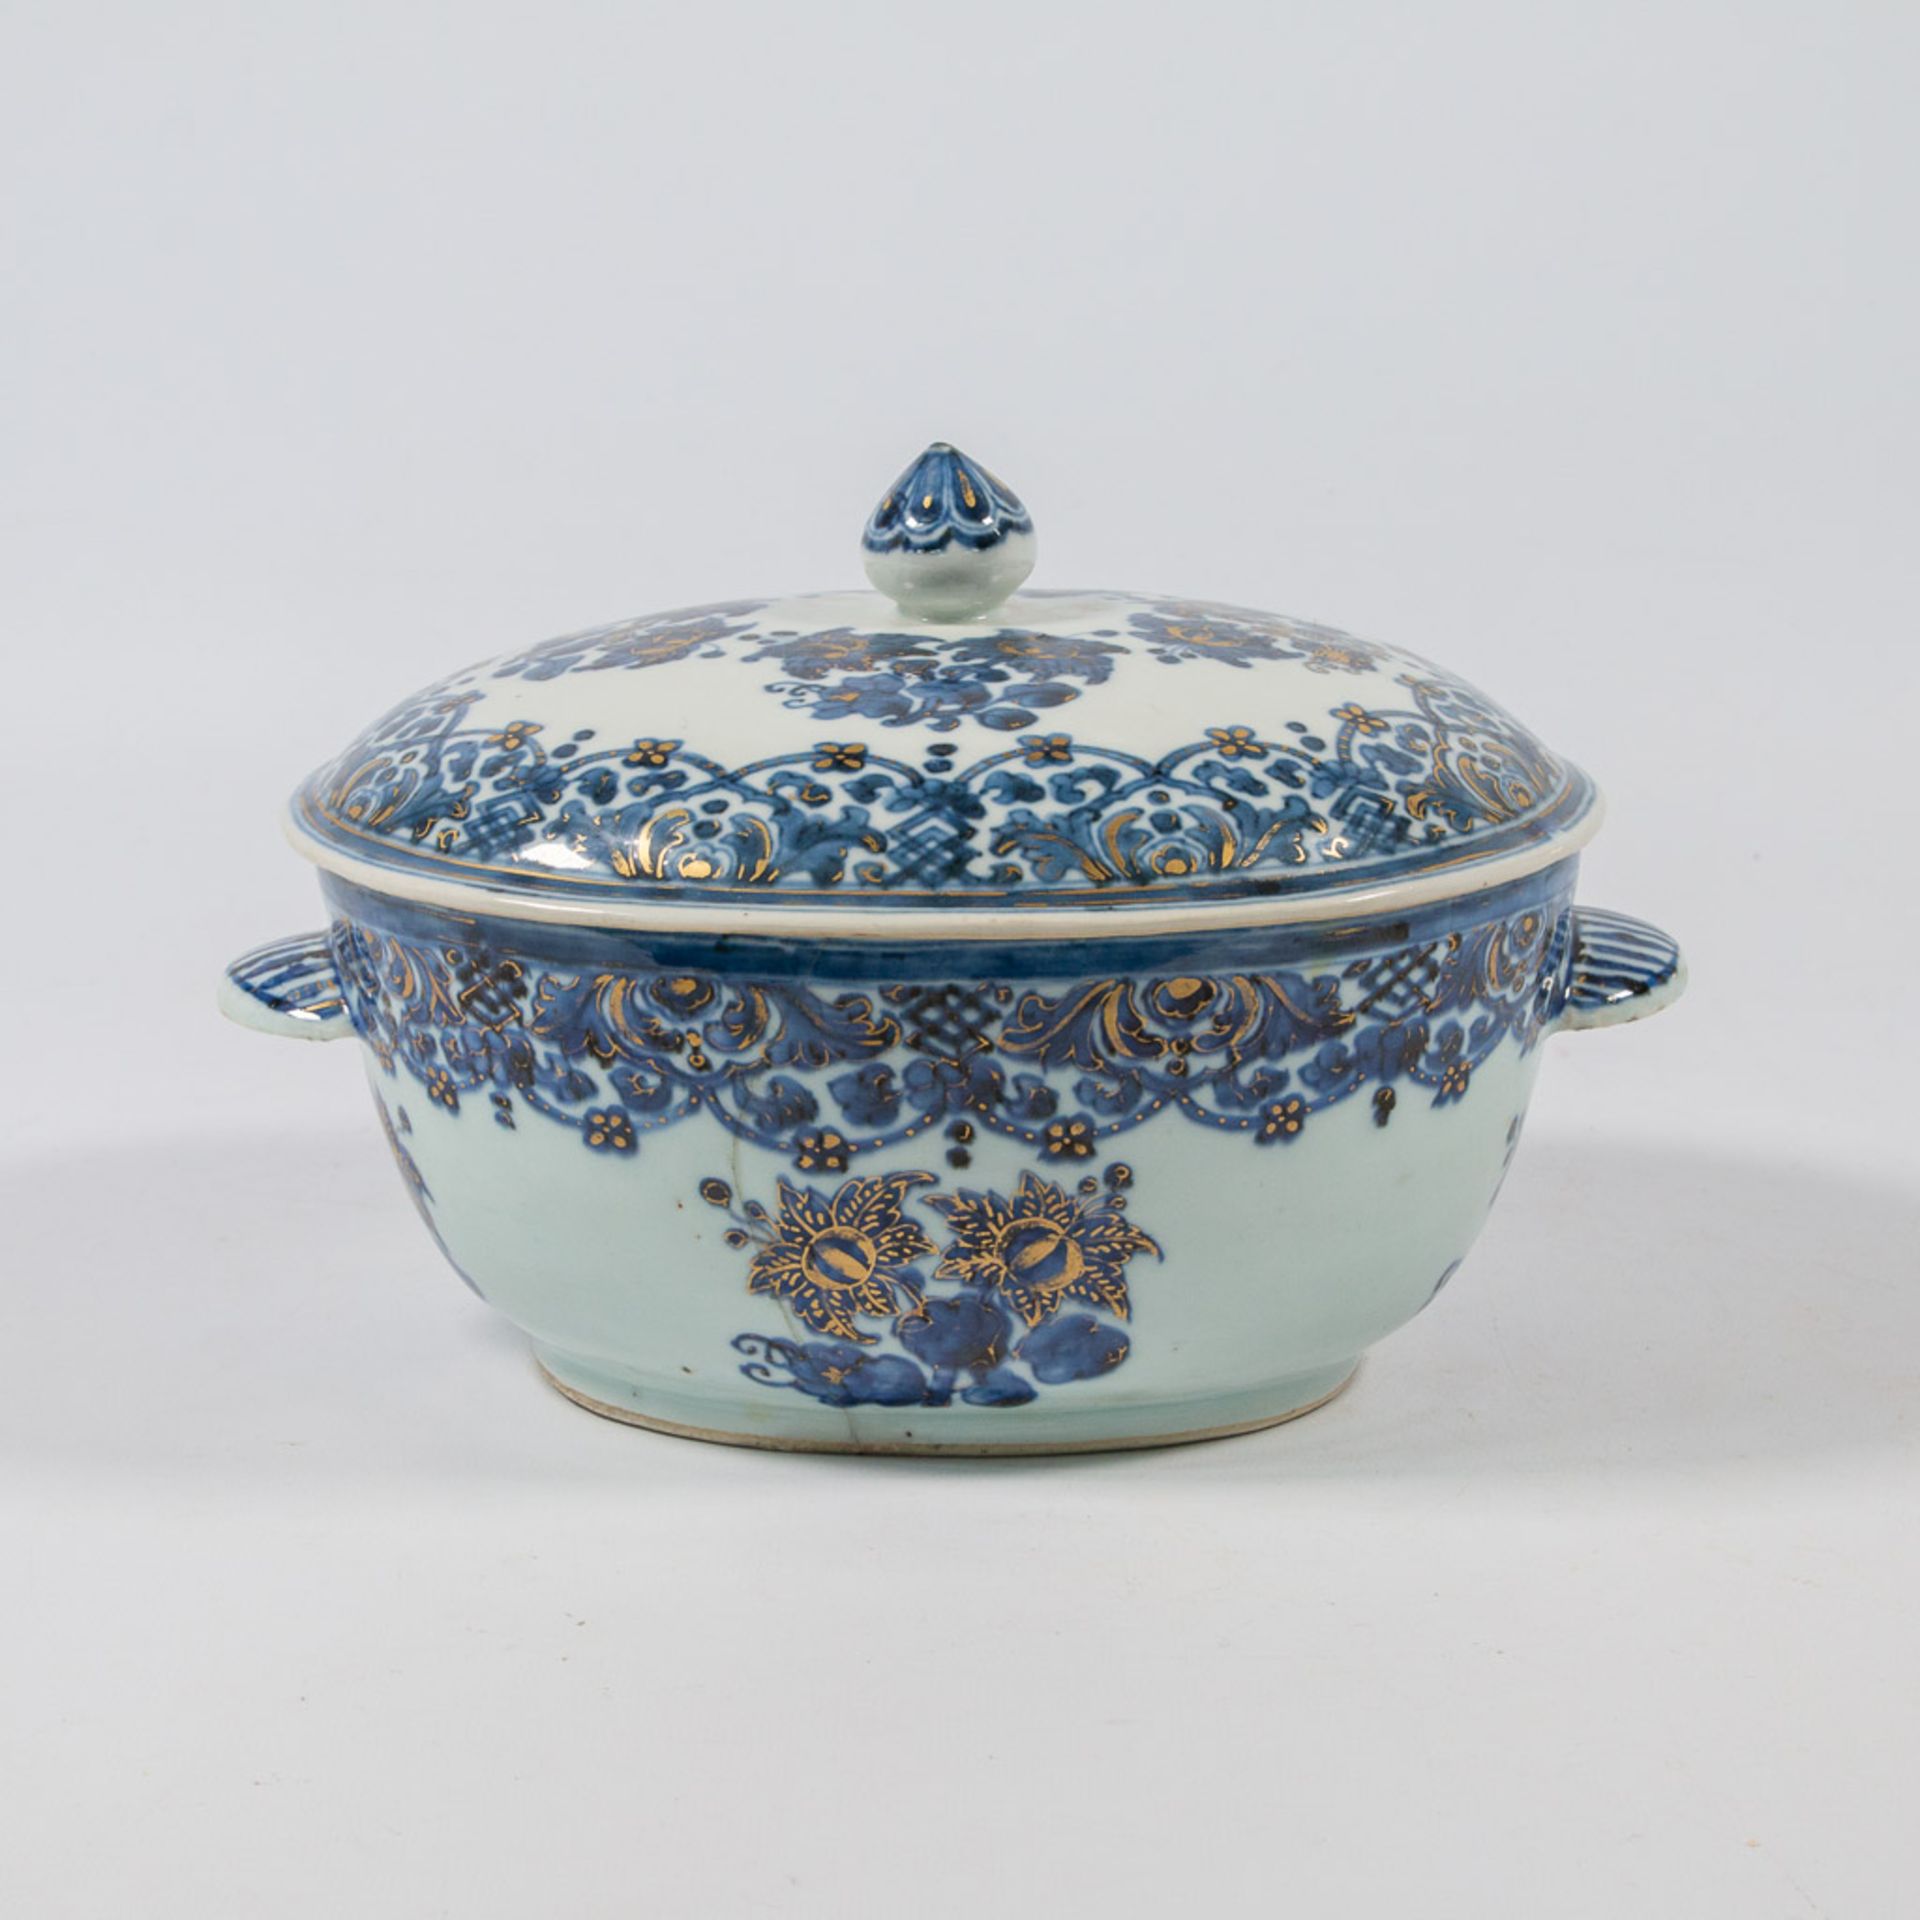 A small tureen with lid, Chinese export porcelain with underglaze blue, white and overglaze gold flo - Image 3 of 24